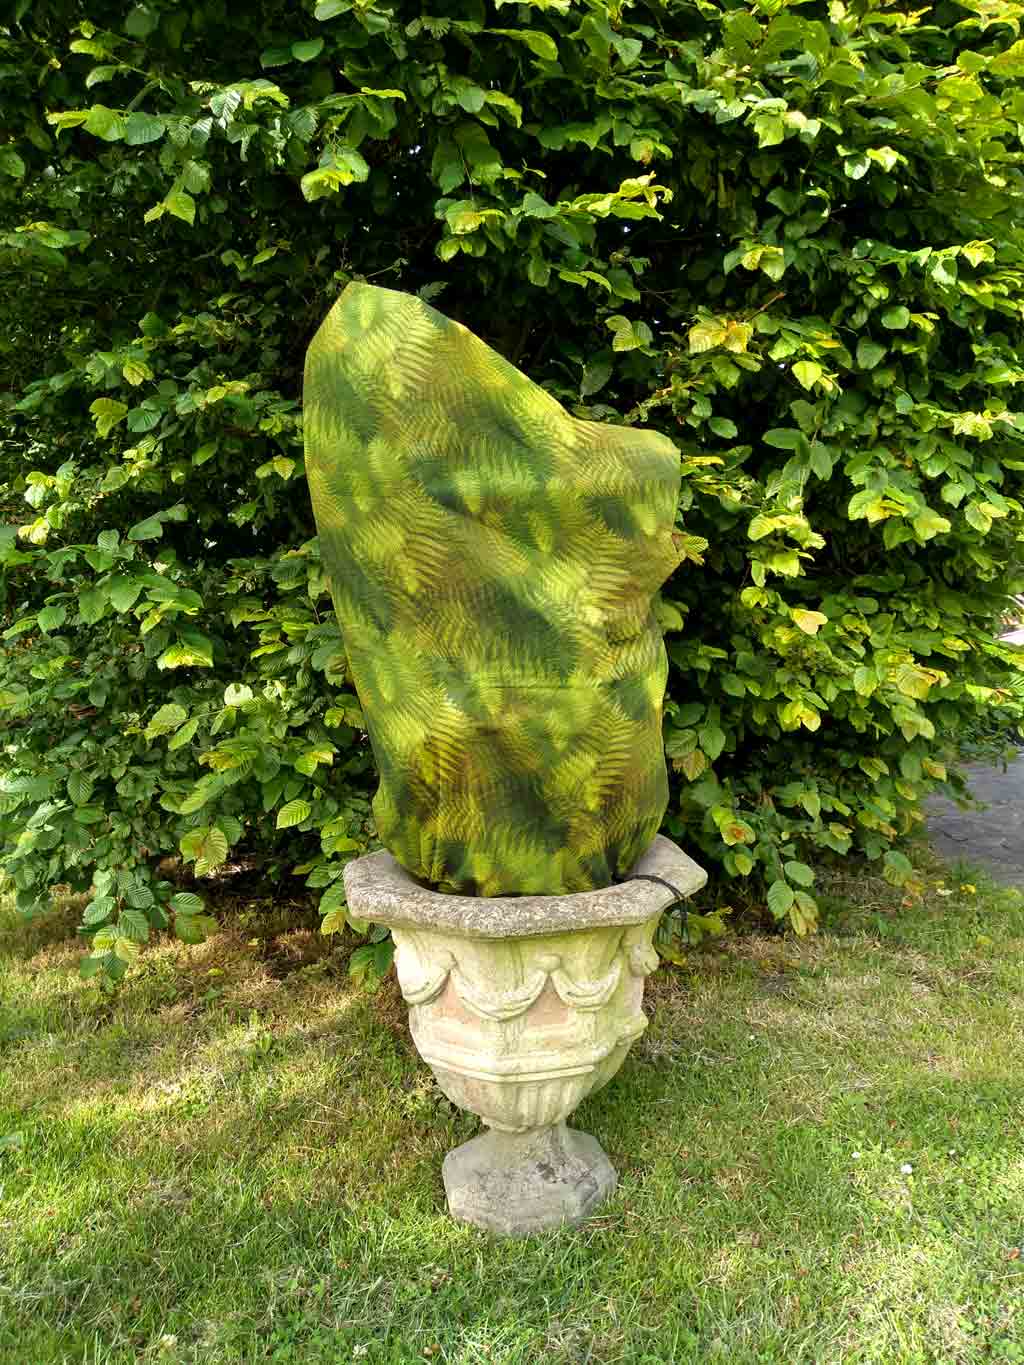 Green Ferne / Camouflage Easy Fleece Jacket in use on potted plant 